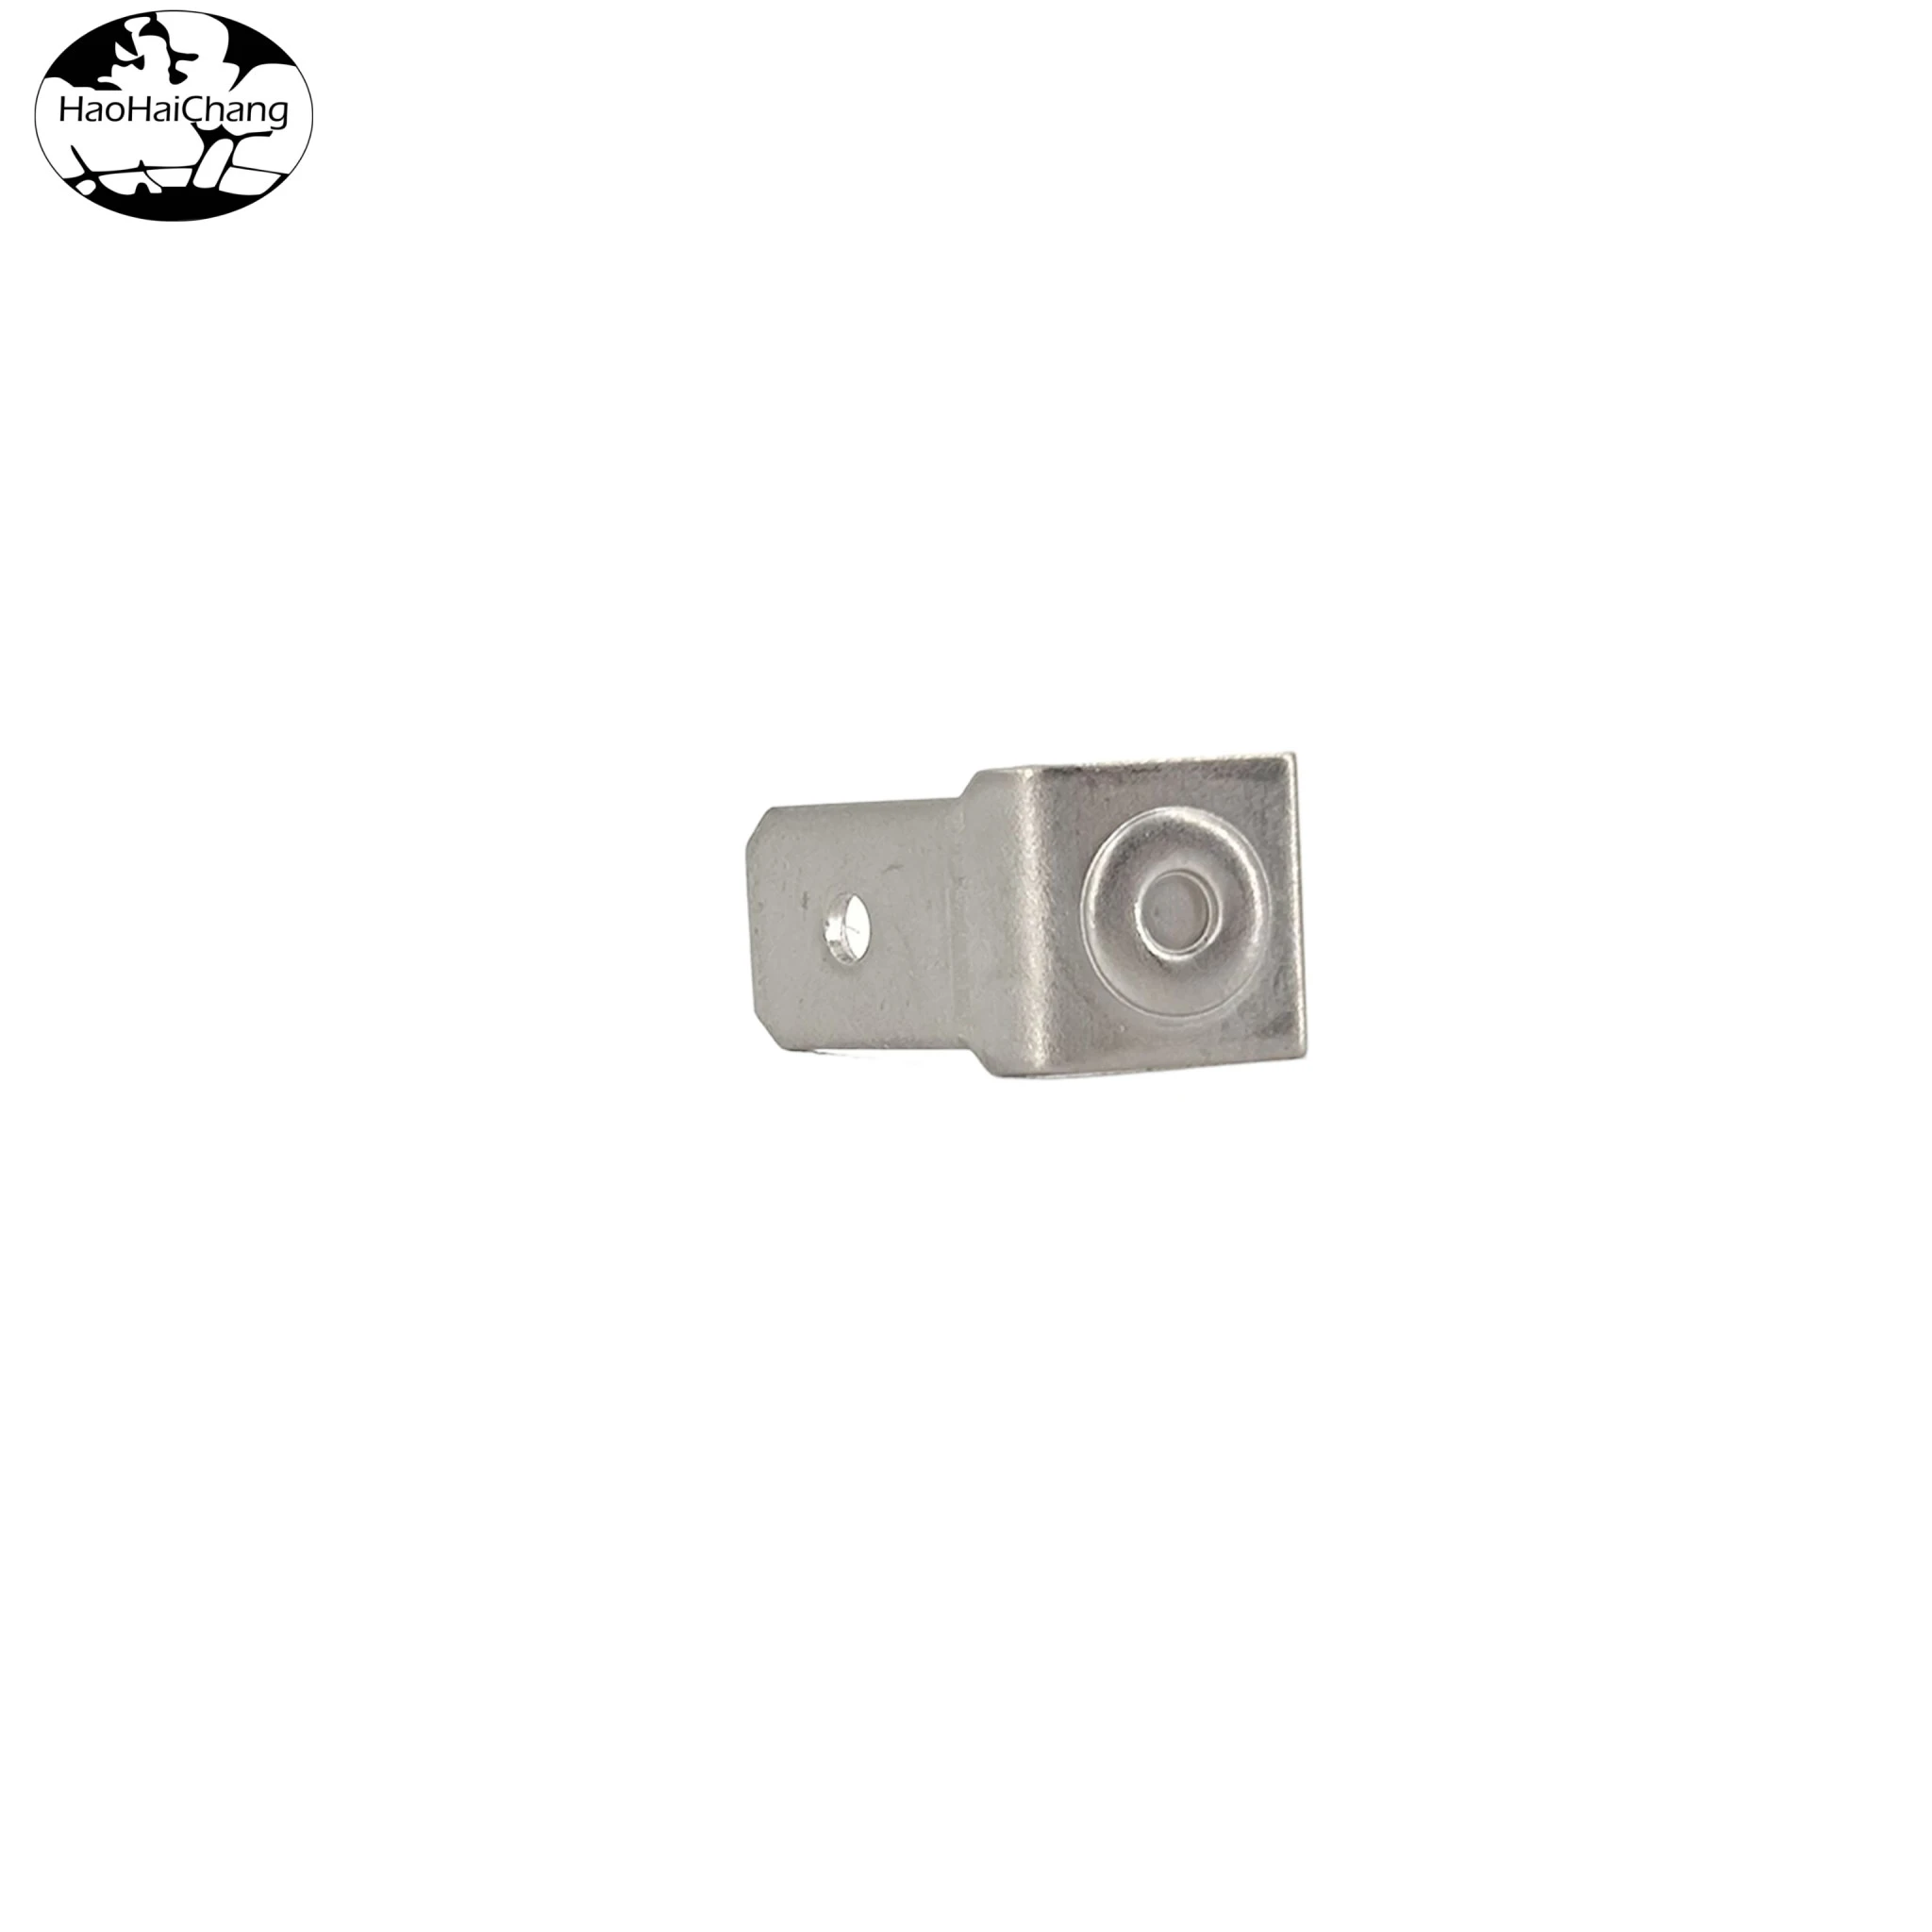 HHC-0174 Connector